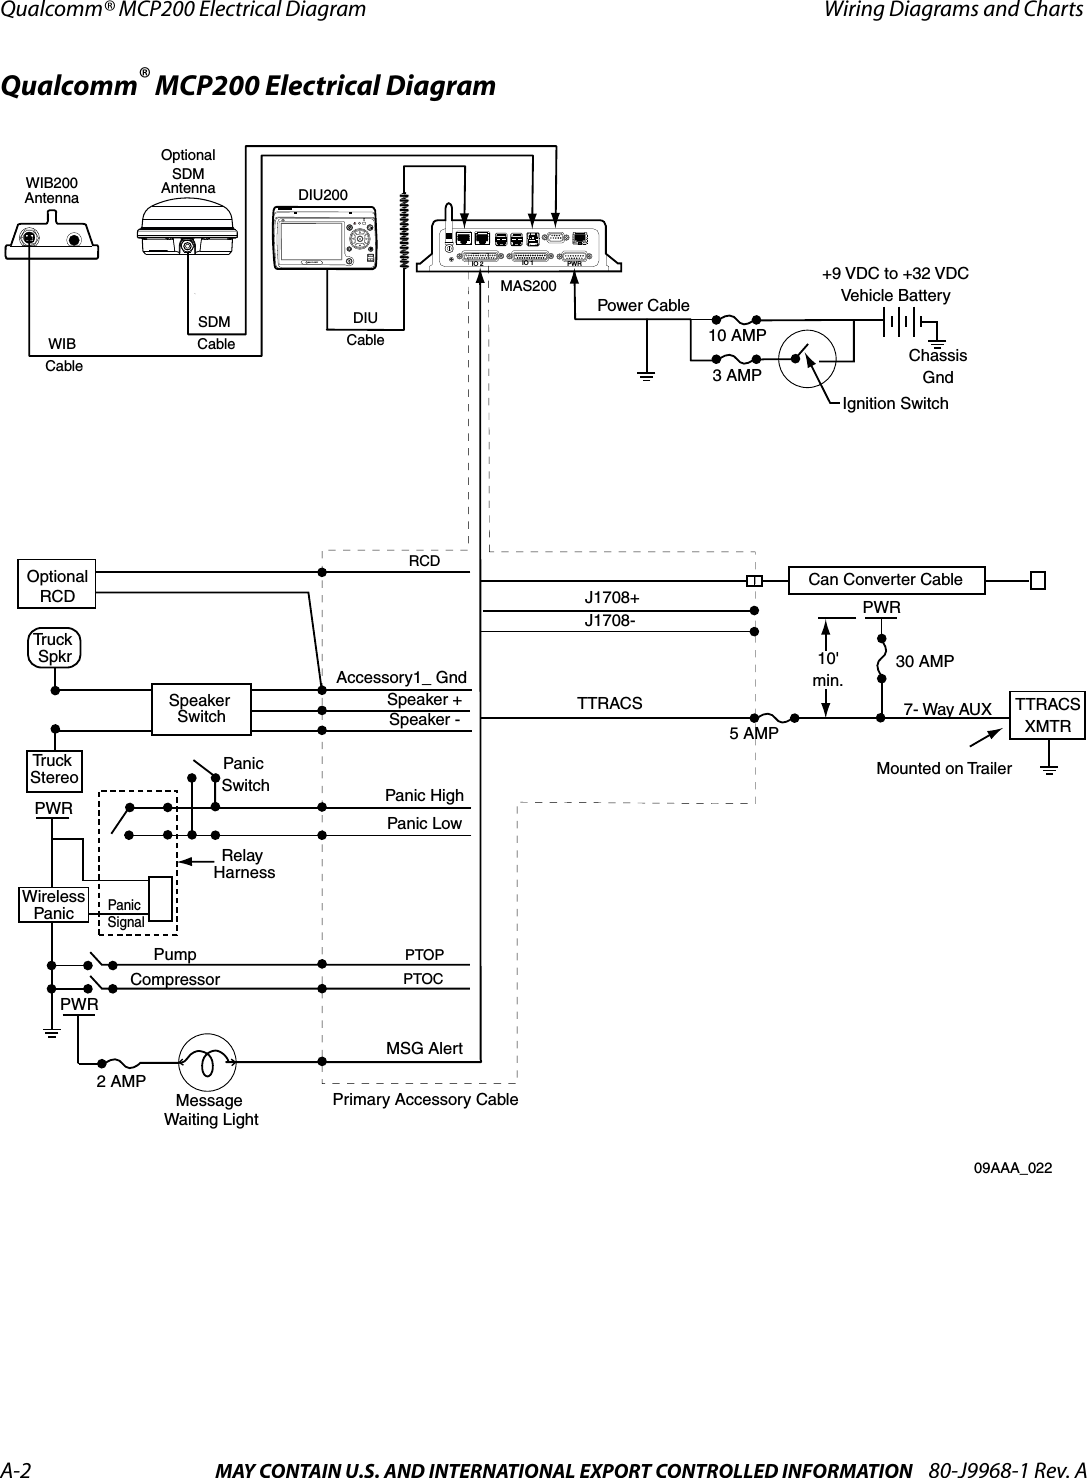 Qualcomm® MCP200 Electrical Diagram Wiring Diagrams and ChartsA-2 MAY CONTAIN U.S. AND INTERNATIONAL EXPORT CONTROLLED INFORMATION 80-J9968-1 Rev. ADO NOT COPYQualcomm® MCP200 Electrical DiagramSDMAntennaSDM CableWIB Cable  Chassis GndDIUCable Message  Waiting Light+9 VDC to +32 VDCVehicle Battery10 AMP3 AMP30 AMPOptionalRCDRCDSpeaker SwitchTruck SpkrTruck StereoSpeaker +Speaker -Panic SwitchRelay HarnessPWRPWRWirelessPanicPanic SignalPumpCompressorPTOPPTOC2 AMPPWRMSG AlertCan Converter Cable7- Way AUX5 AMPTTRACSJ1708+J1708-TTRACSXMTRMounted on TrailerPanic HighPanic Low10&apos;min.Primary Accessory CablePower CableIgnition SwitchMAS200Optional!IO 2 IO 1 PWR  DIU200WIB200Antenna09AAA_022Accessory1_ Gnd